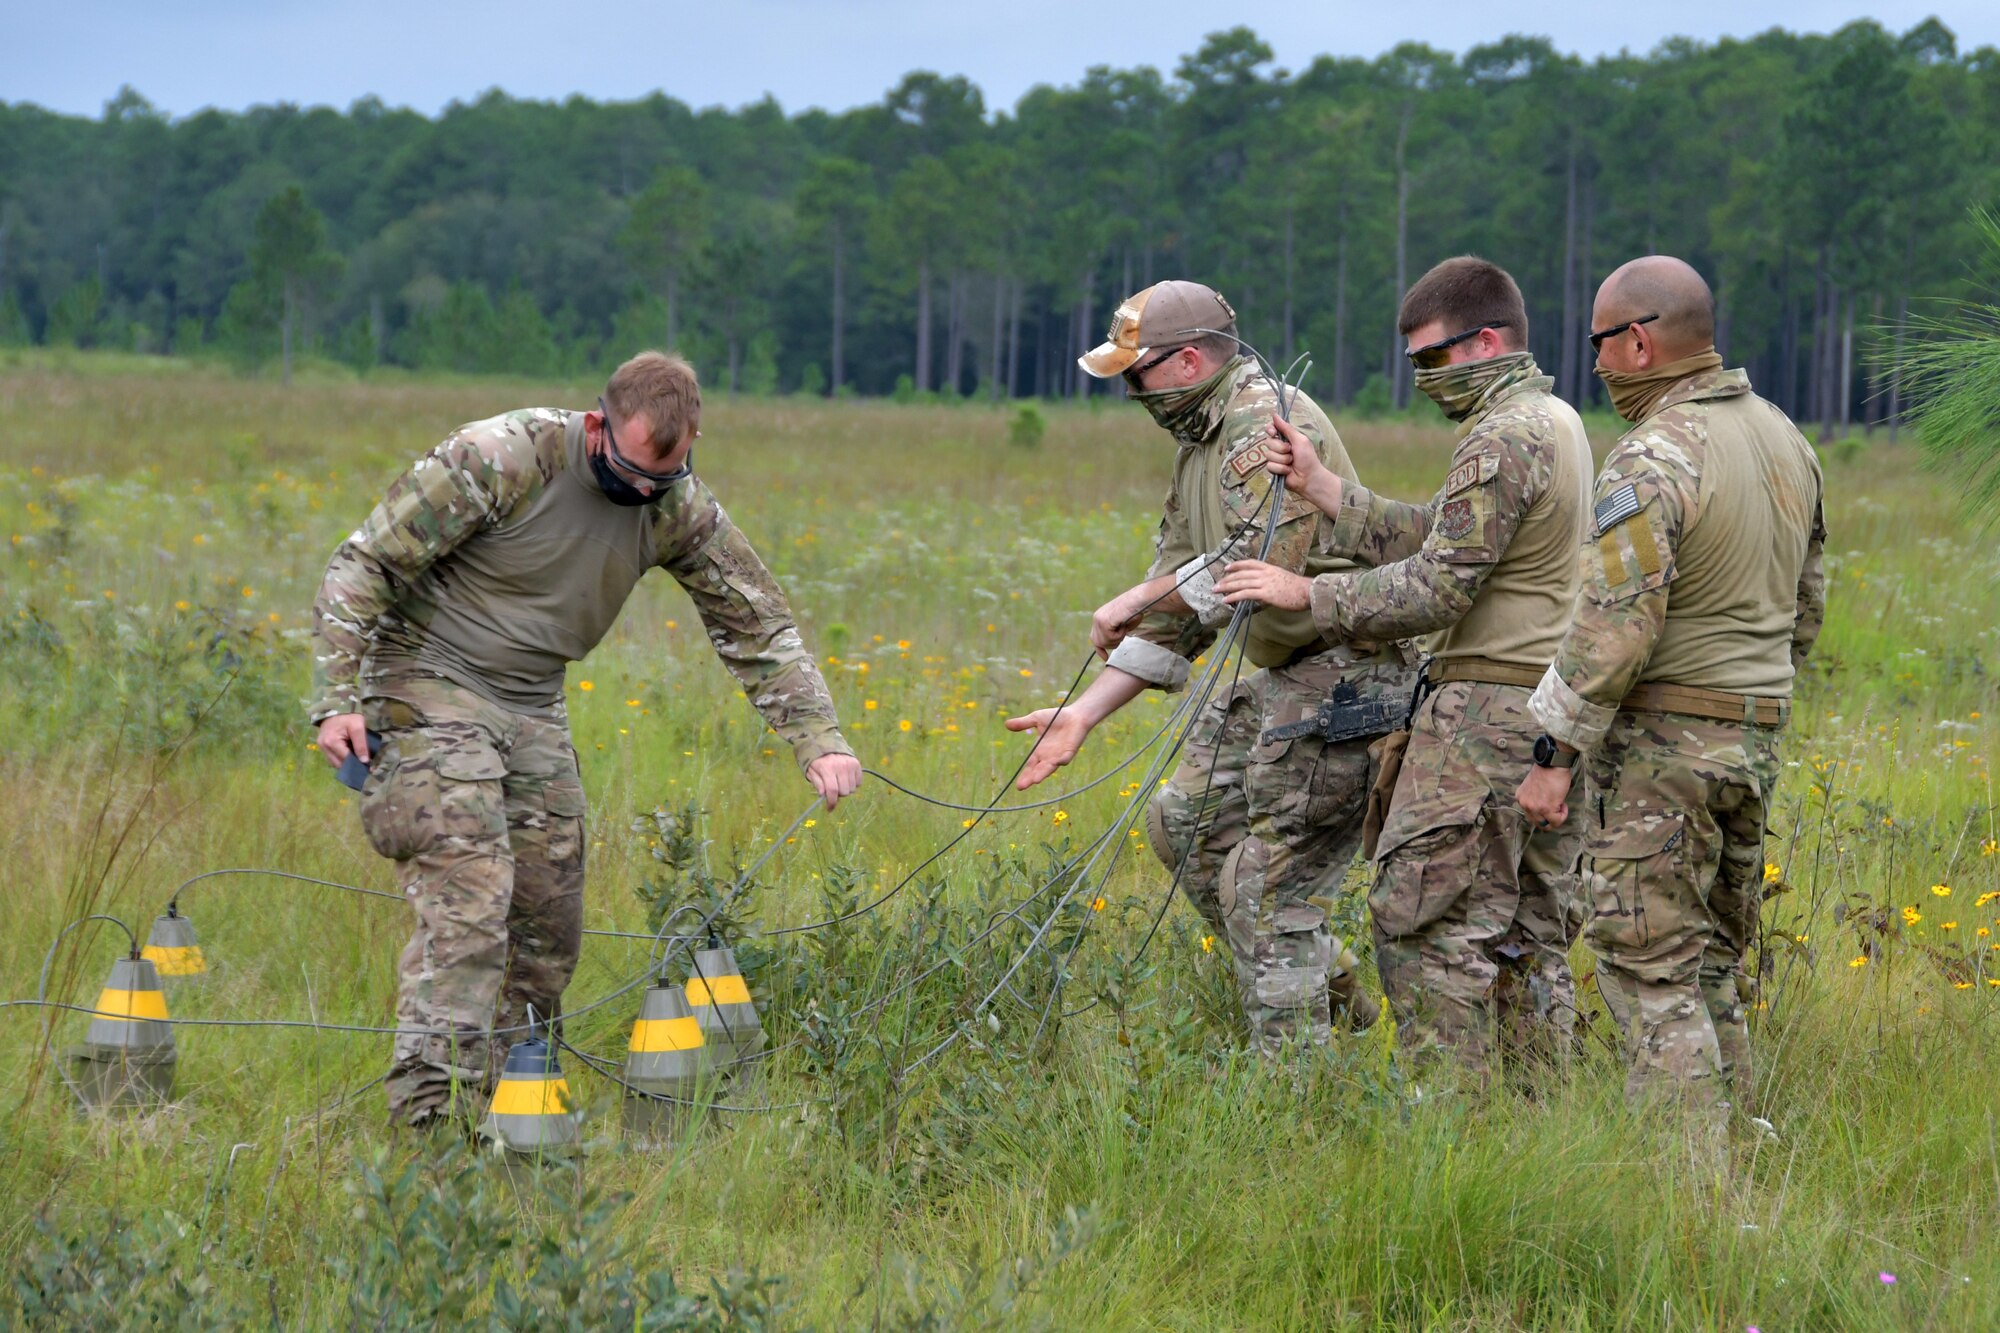 Members of the 94th EOD Flight prepare shape charges during an EOD training exercise at Ft. Stewart, Georgia, Sept. 17, 2020. Throughout the exercise, members went through numerous tasks such as working with electric demolition procedures, non-electric demolition procedures, demolition shape charges and cratering charges. (U.S. Air Force photo by Airman 1st Class Kendra A. Ransum)